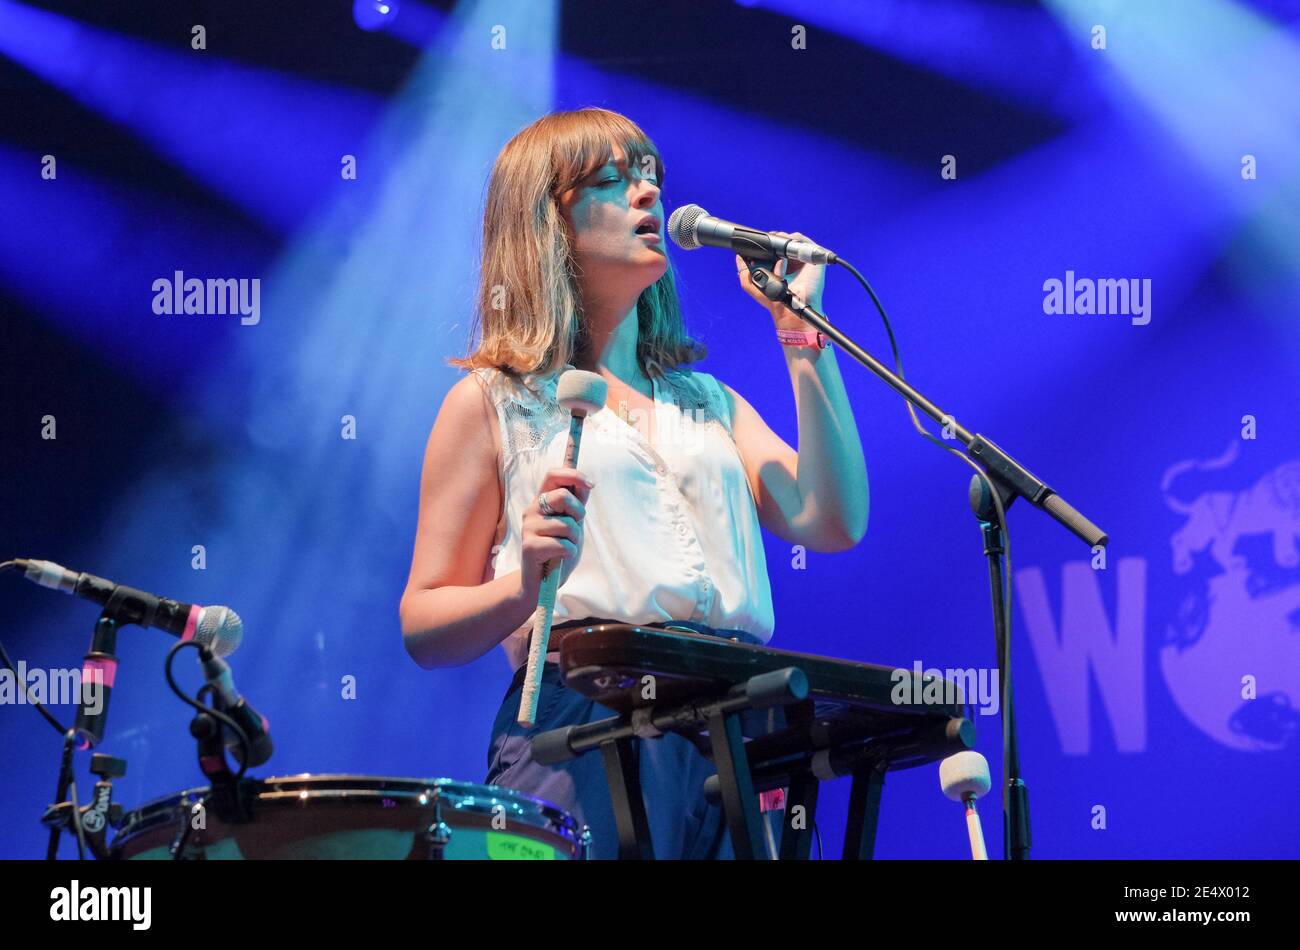 Emily Staveley-Taylor of The Staves performing at the Womad Festival, Charlton Park, UK. July 25, 2015 Stock Photo